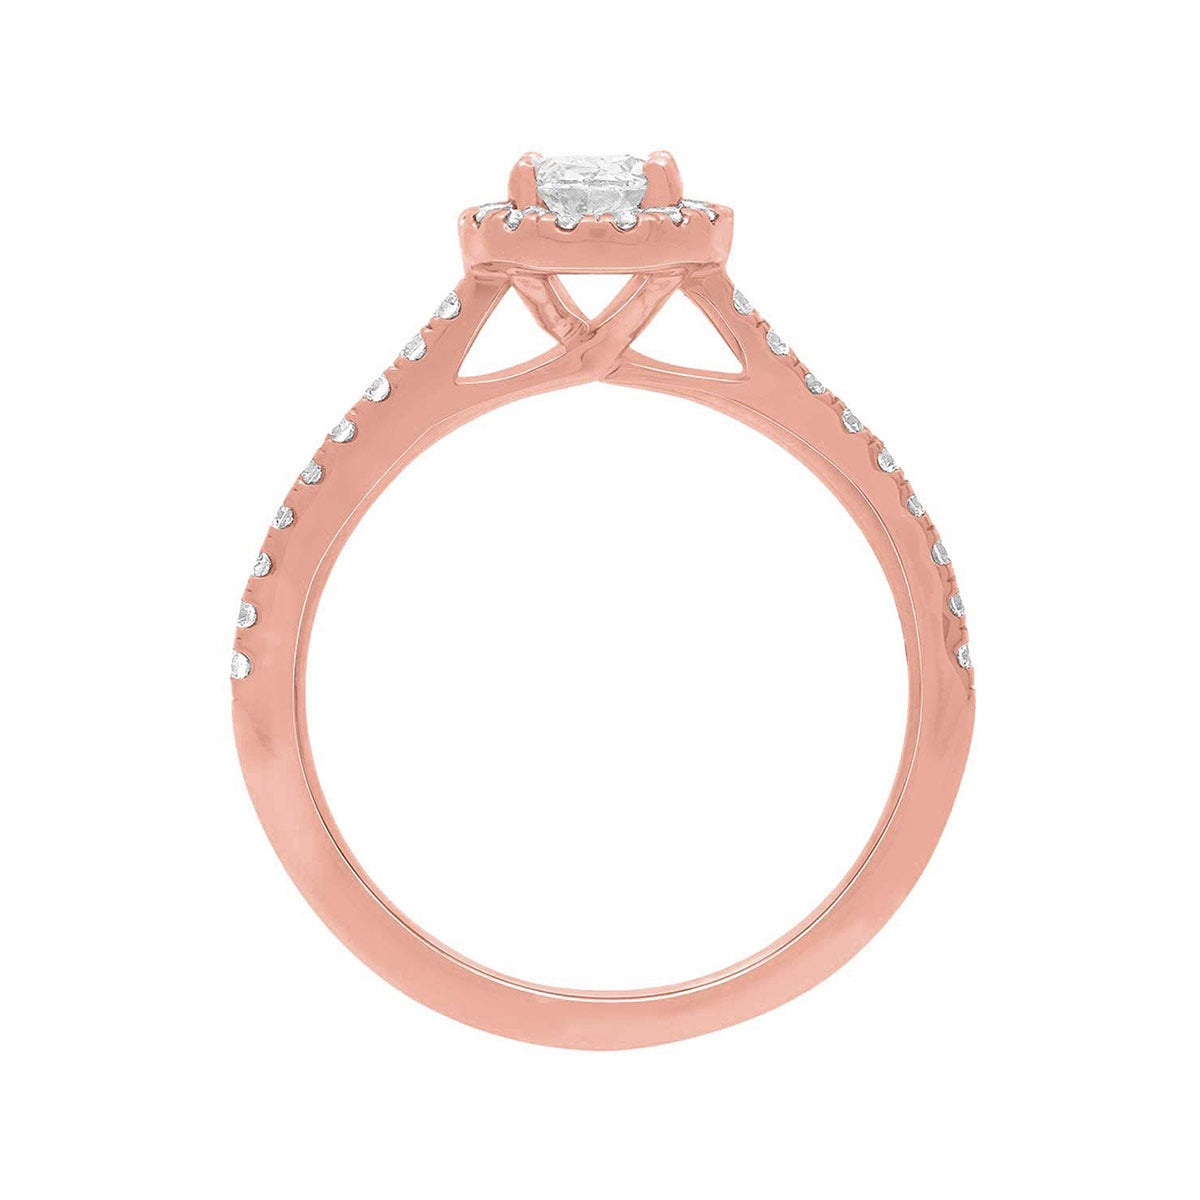 Oval Halo Engagement Ring made of rose gold pictured standing upright